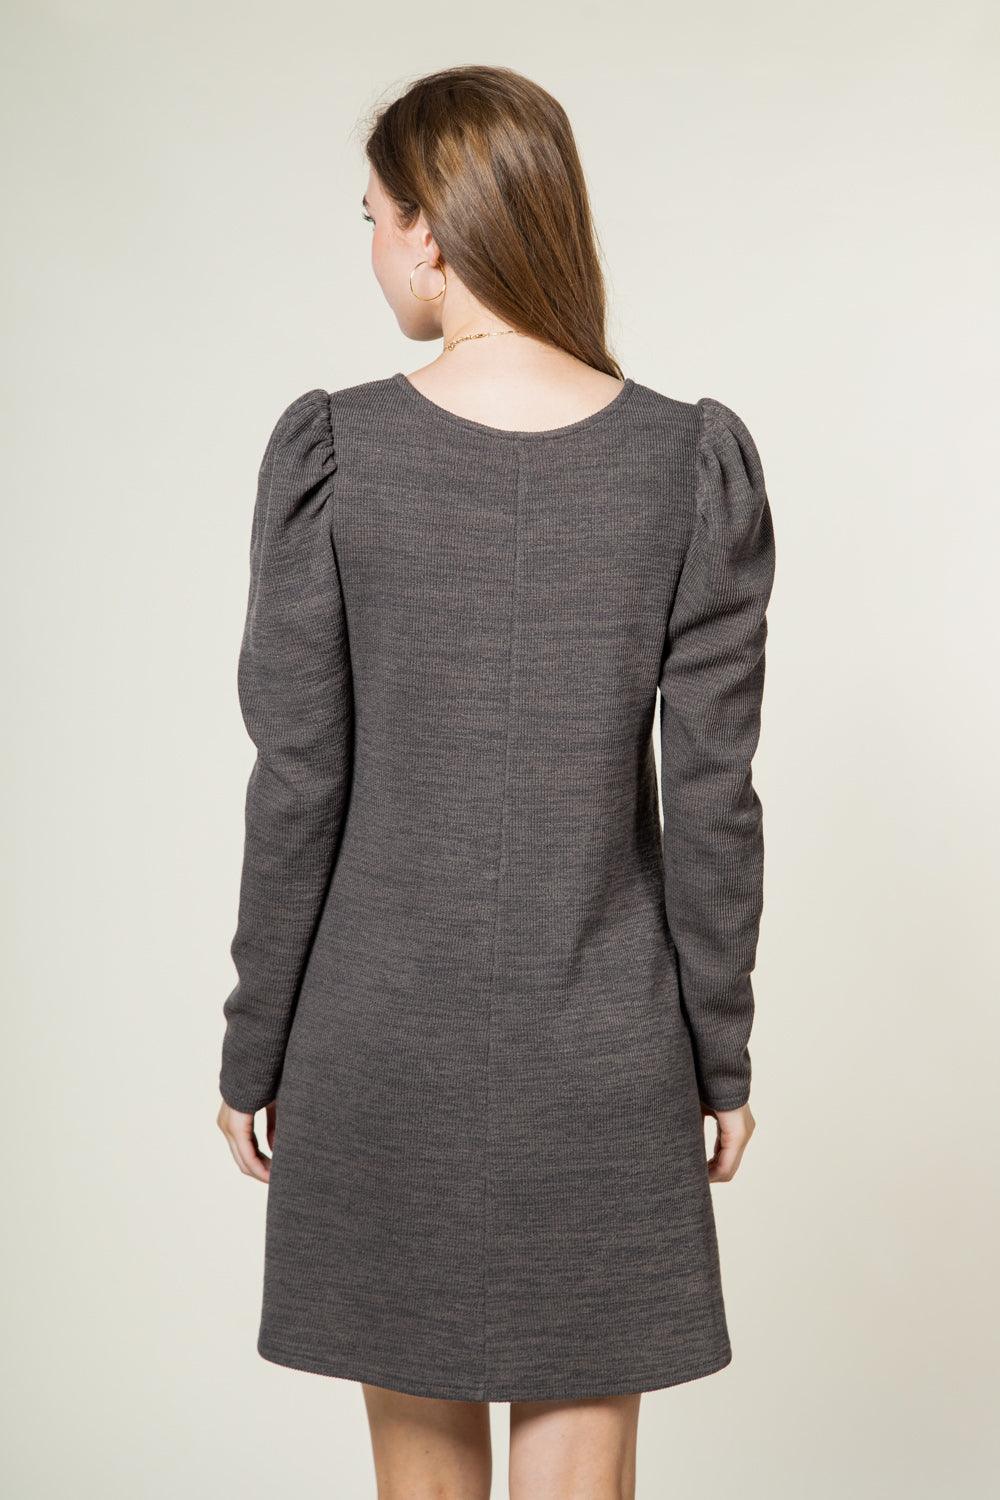 Heather Charcoal Ribbed Knit Dress - Strawberry Moon Boutique